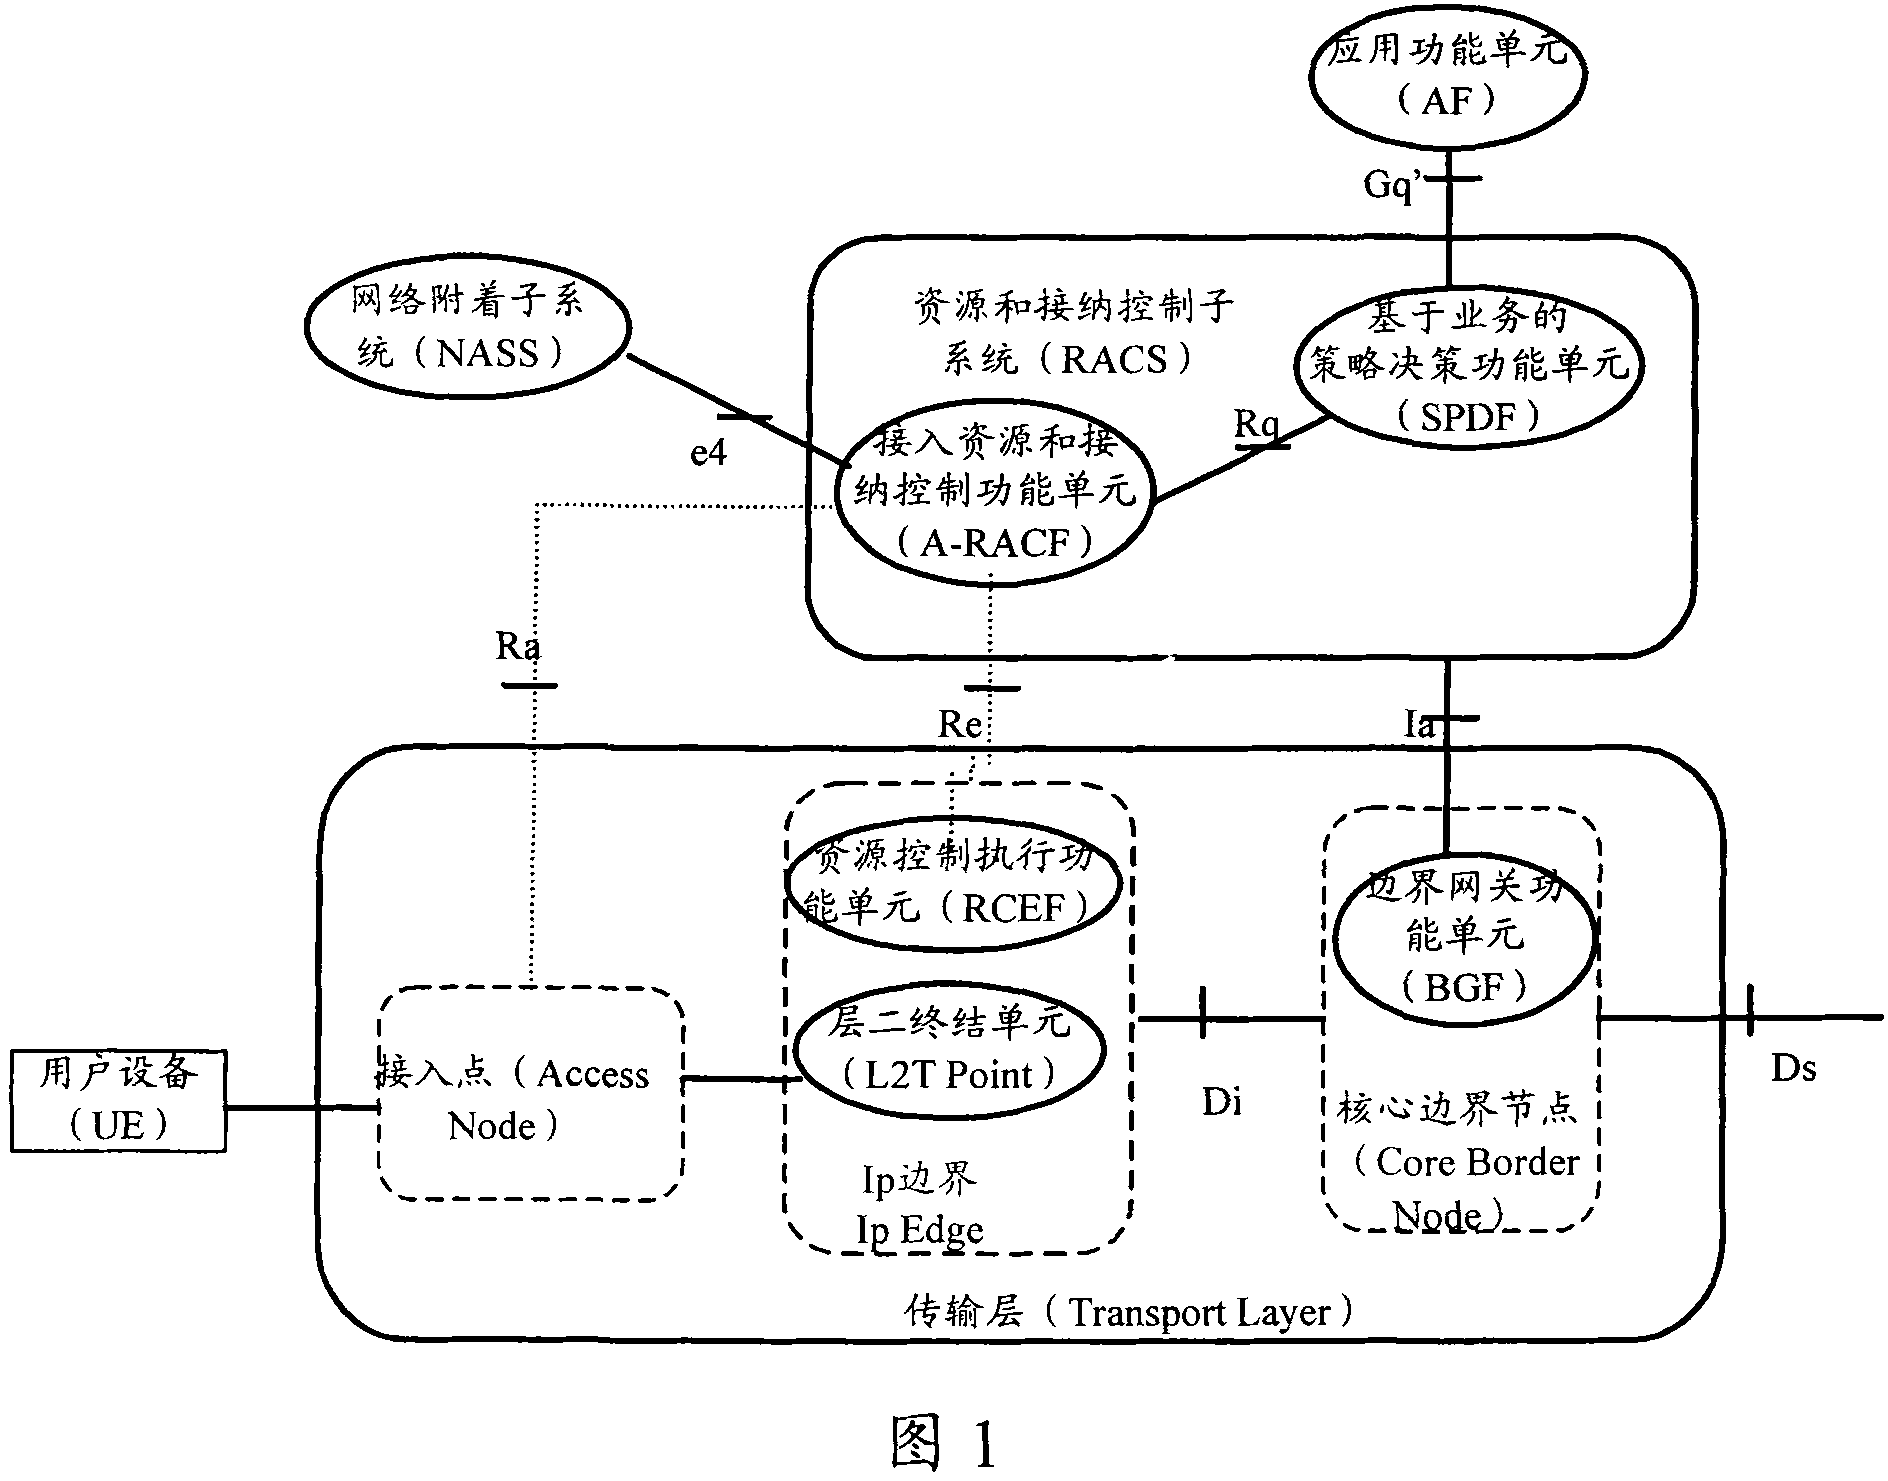 Resource admission control method and policy decision functional unit